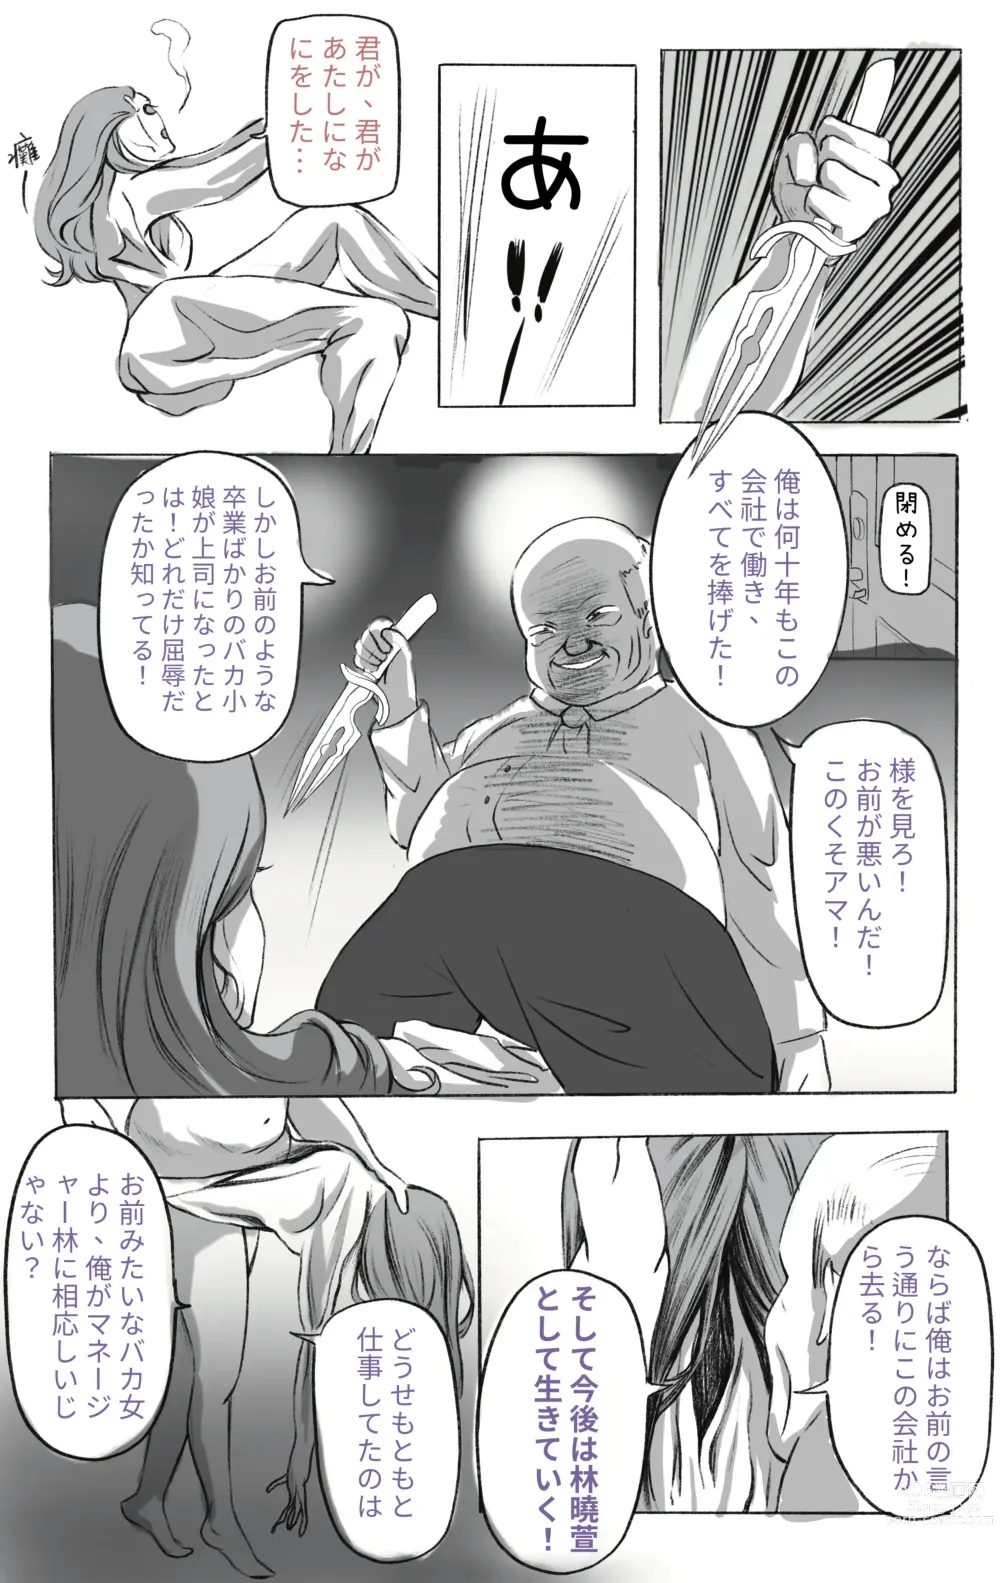 Page 9 of doujinshi 主管的秘密